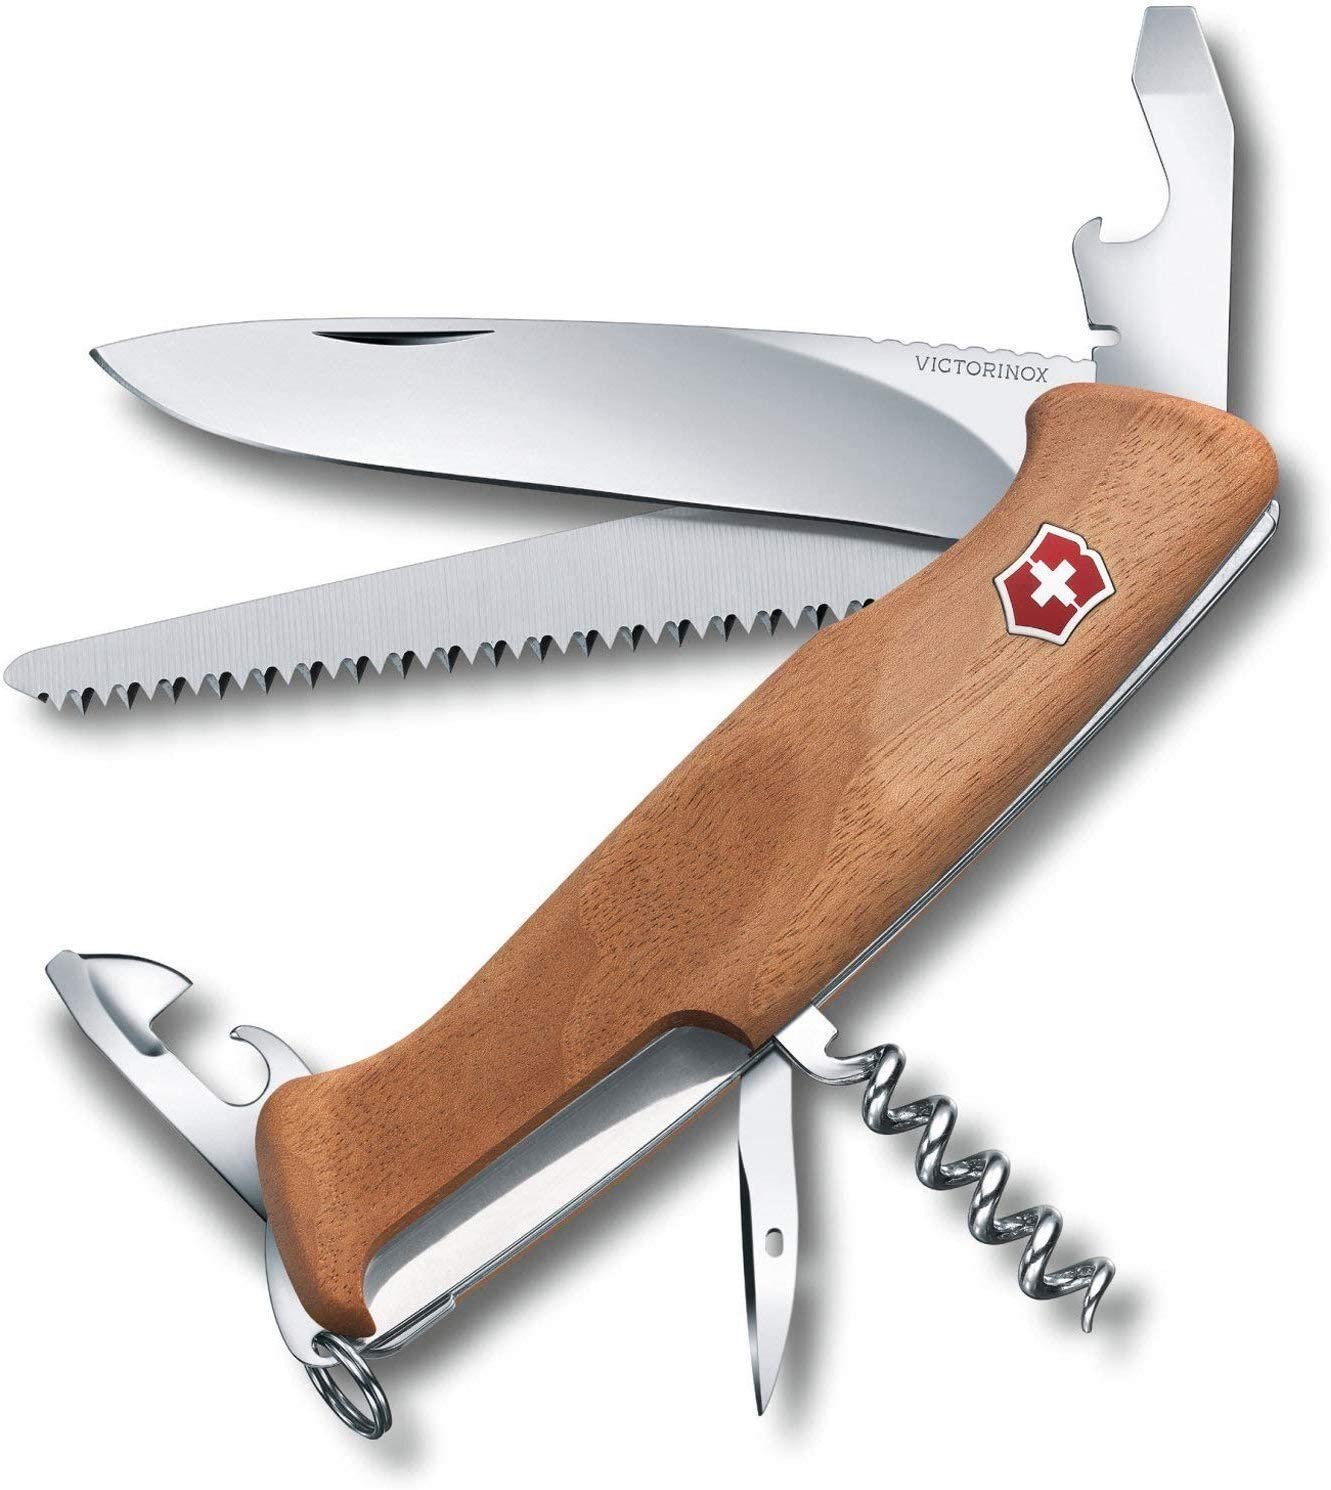 Recommended Totoku knife (Swiss Army knife) summary! If you are an outdoor man, you want to have one., Shieldon